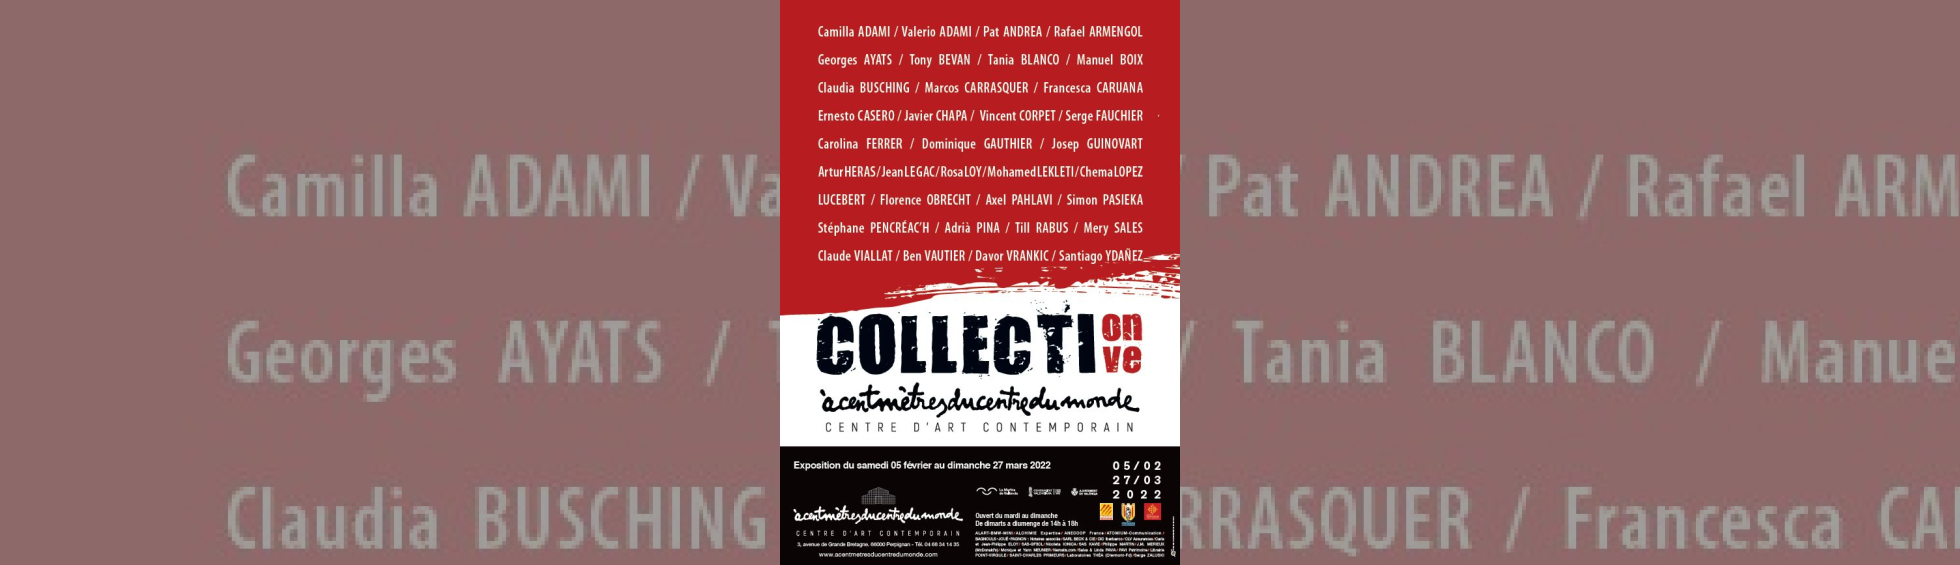 Affiche Exposition "COLLECTIon COLLECTIve"